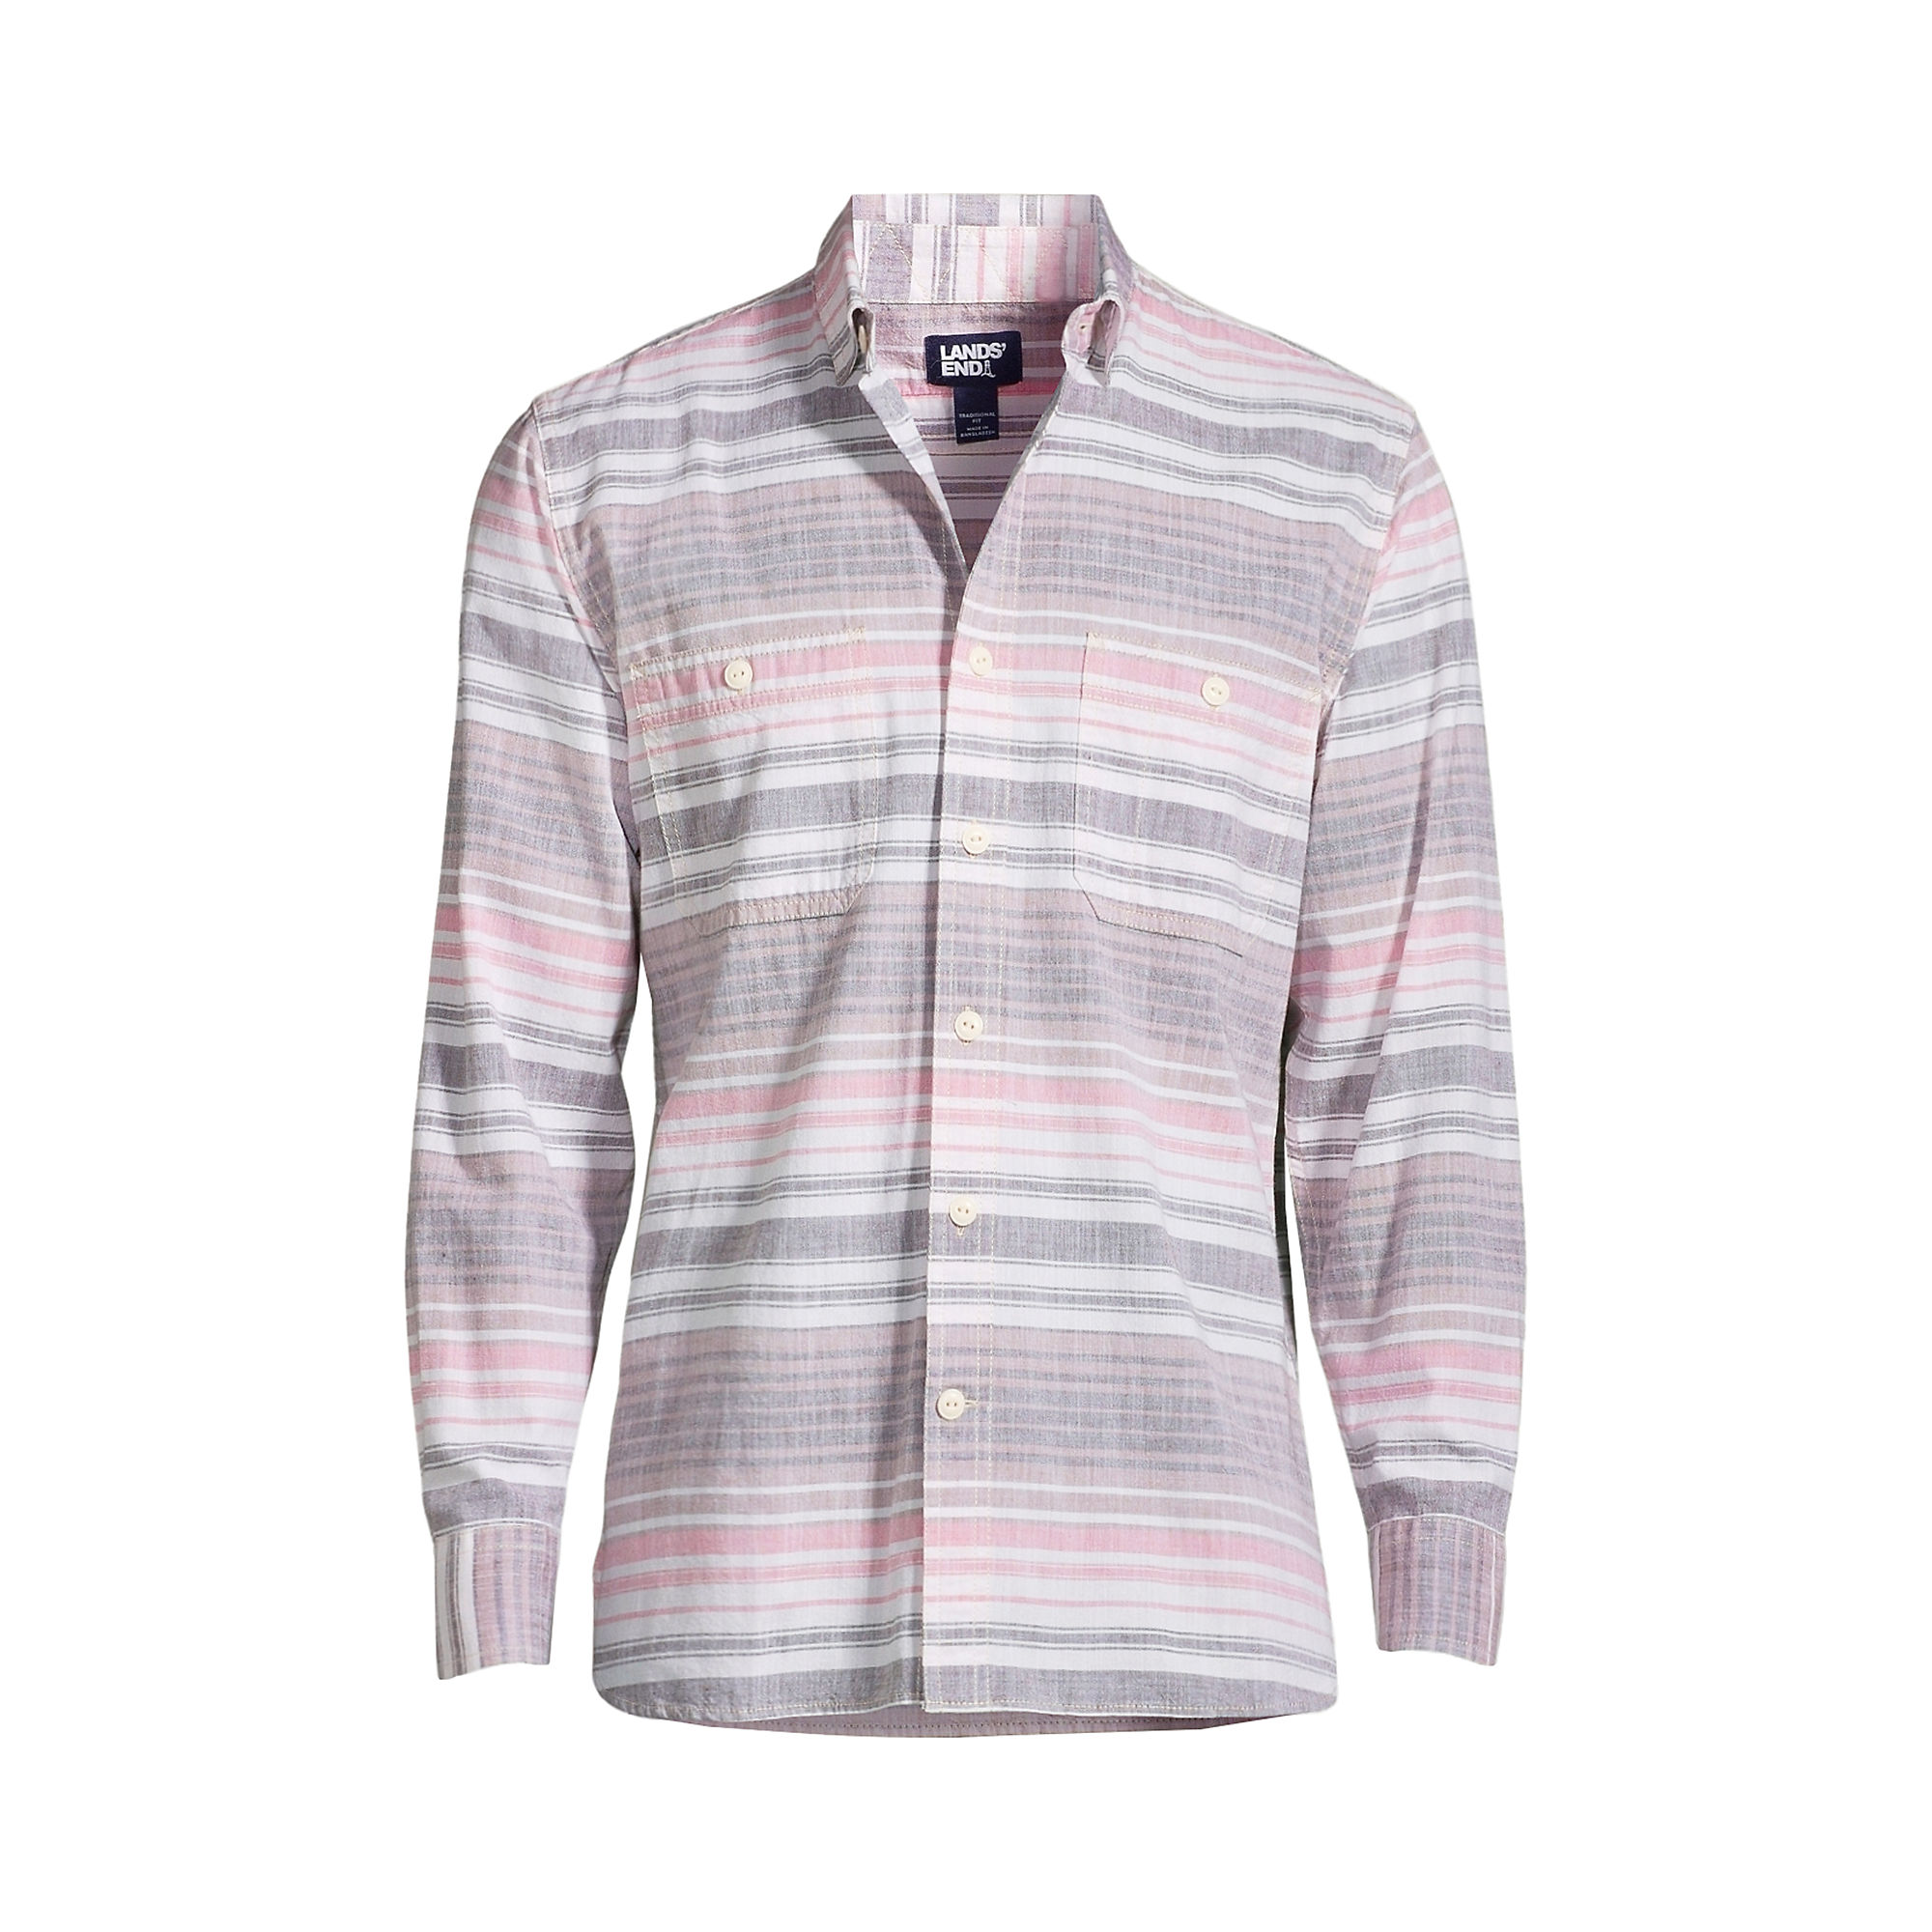 Lands End Men's Traditional Fit Chambray Work Shirt (Soft Mojave Rose Multi Stripe )